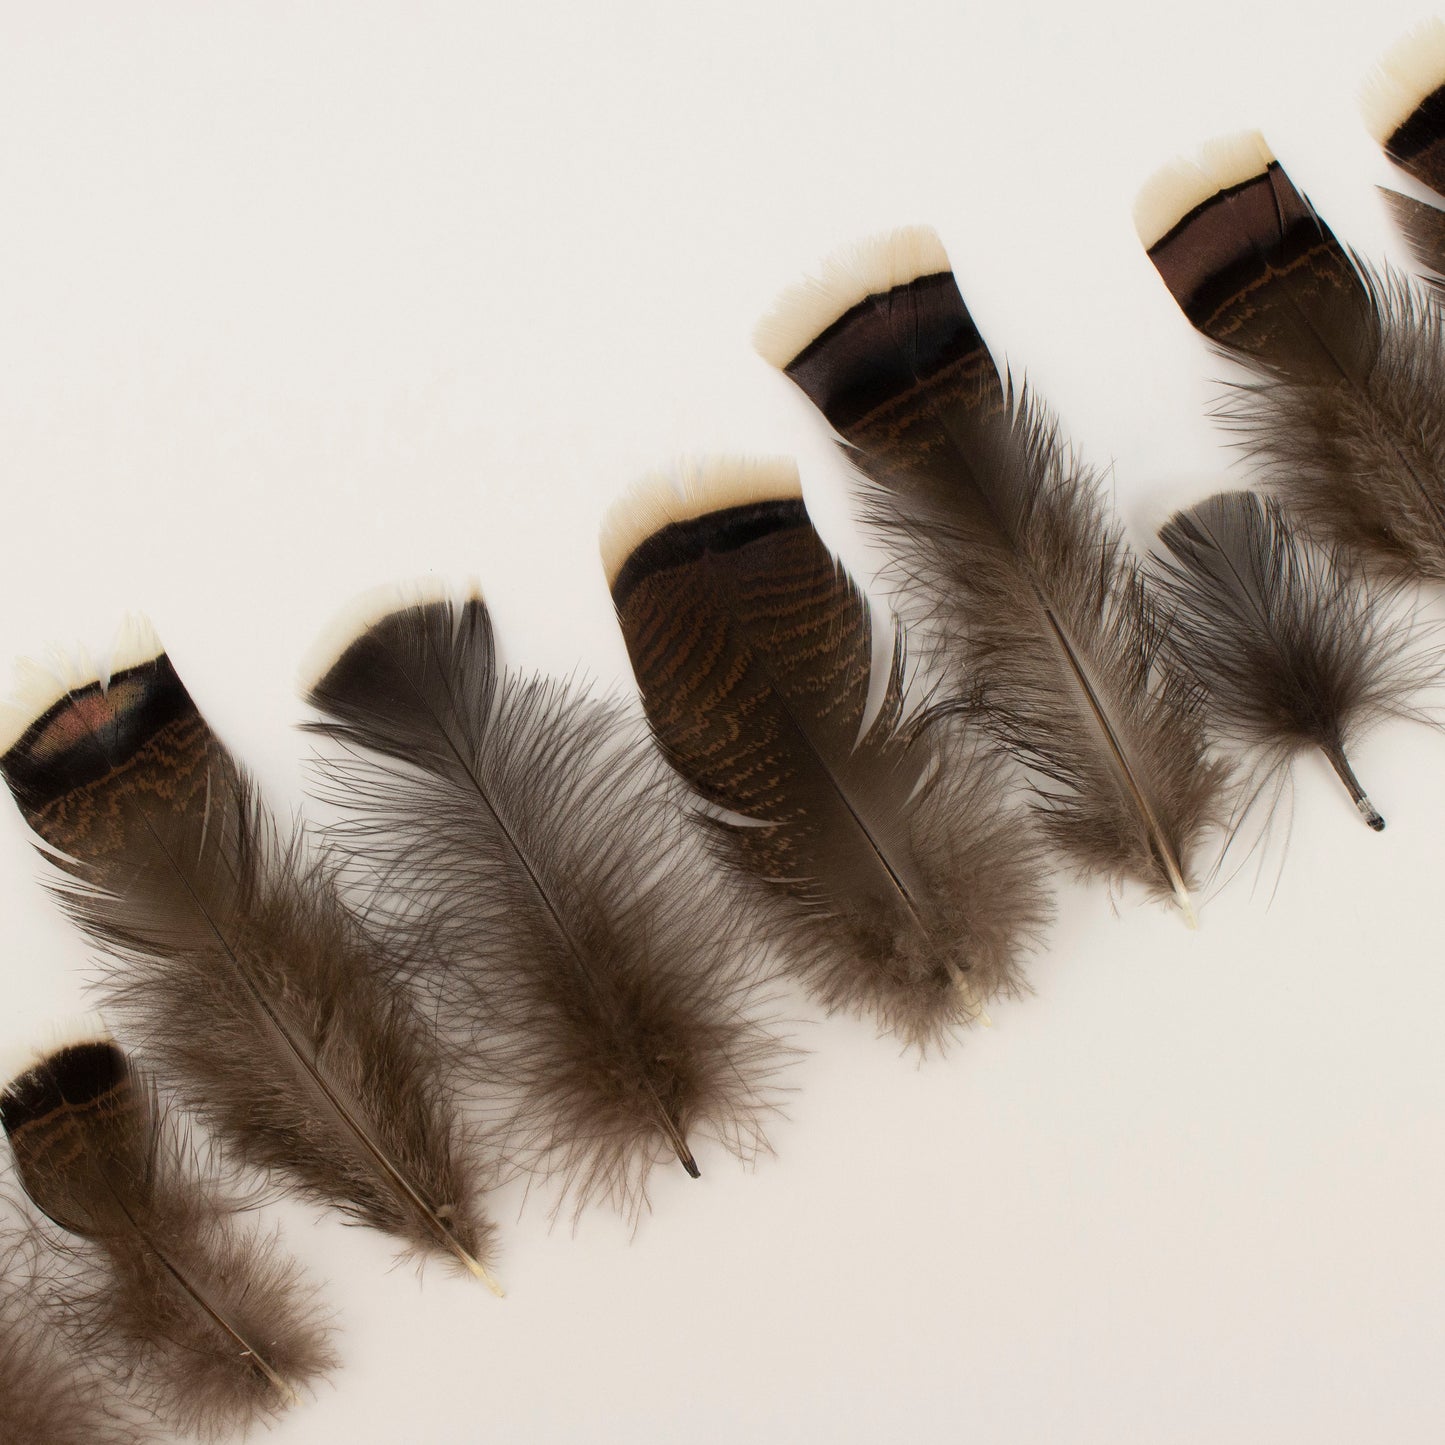 Natural Turkey Bronze Feathers 3-8" - Loose 1/4 lb